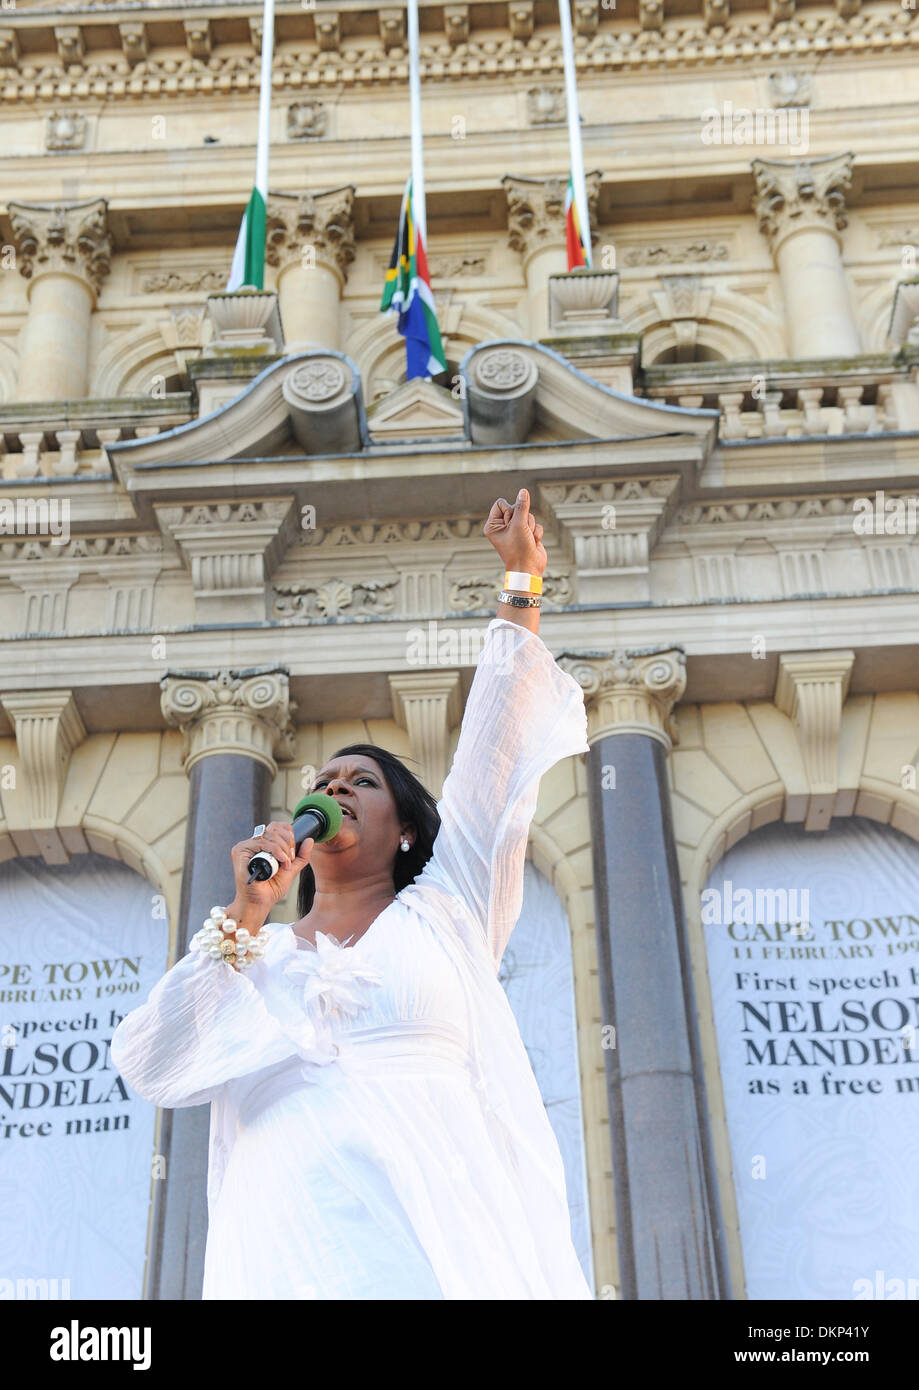 Cape Town, South Africa. 8th Dec, 2013. International artist VICKY SAMPSON, sings to the crowd of mourners. The City of Cape Town hosted an interfaith service on the Grand Parade as the day was declared a national day of prayer and reflection on the life of Nelson Mandela. Visitors also placed flowers and condolence messages on the barricade erected to accommodate it. Various religious leaders said prayers for the late South African President. Photo by Roger Sedres/ImageSA Stock Photo